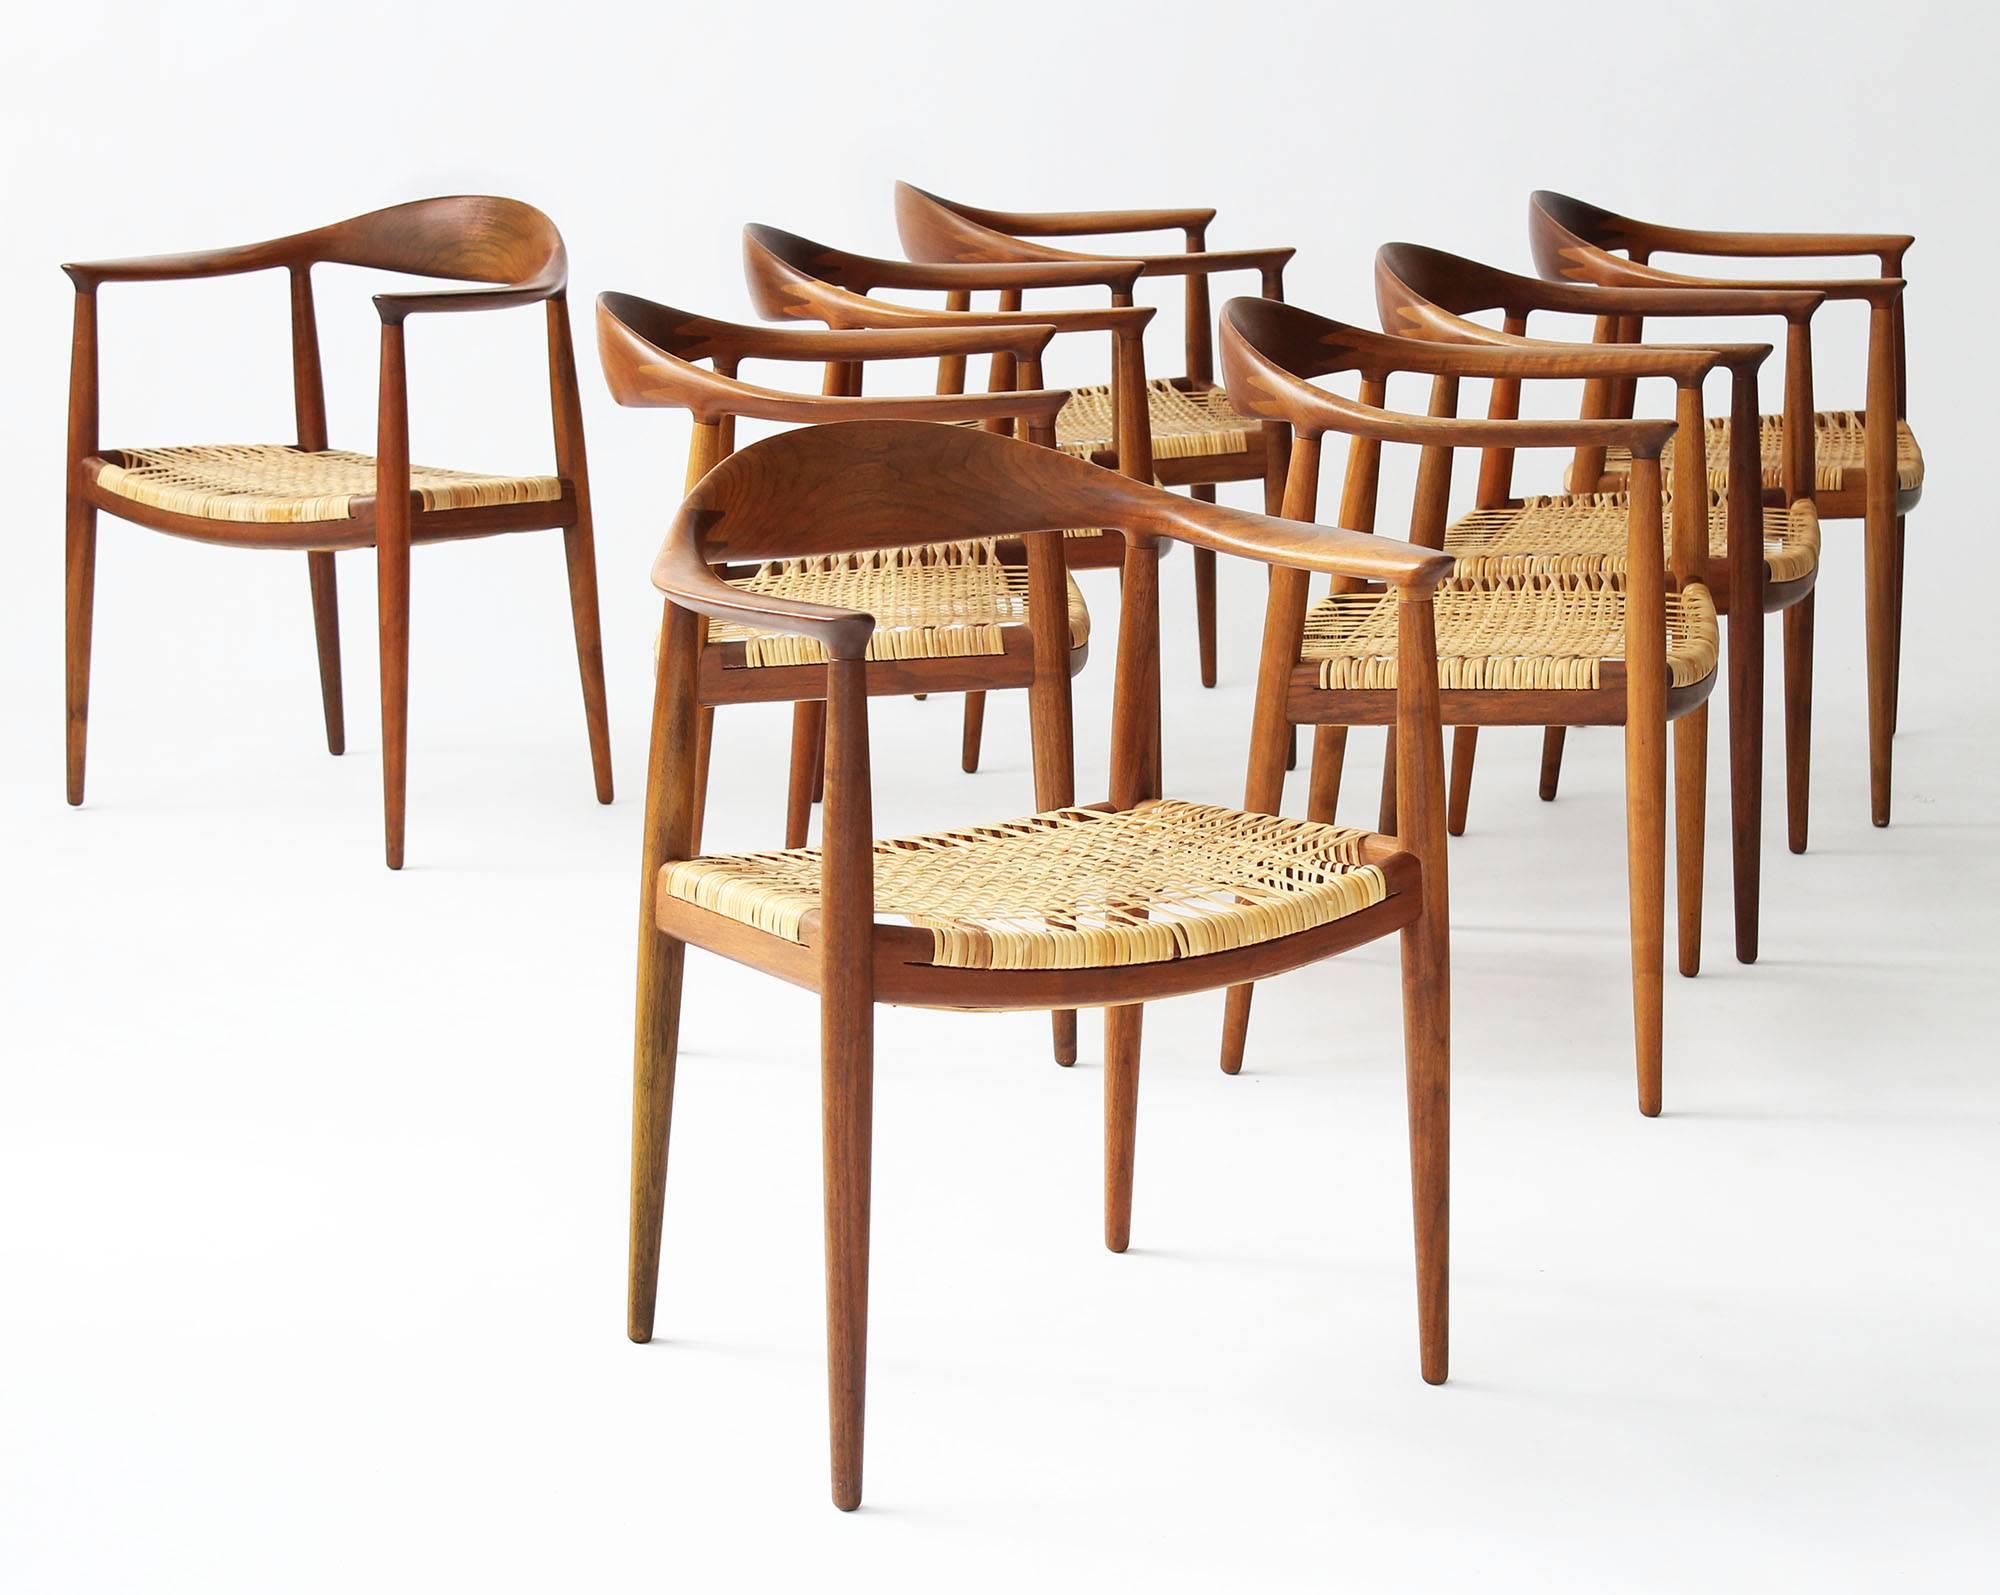 Iconic Hans Wegner round chair, also known as the chair, set of eight.
All examples bear the Johannes Hansen branding on support bar under the seats.
'The Chair' lives up to its given name with its perfect marriage of beautiful form and